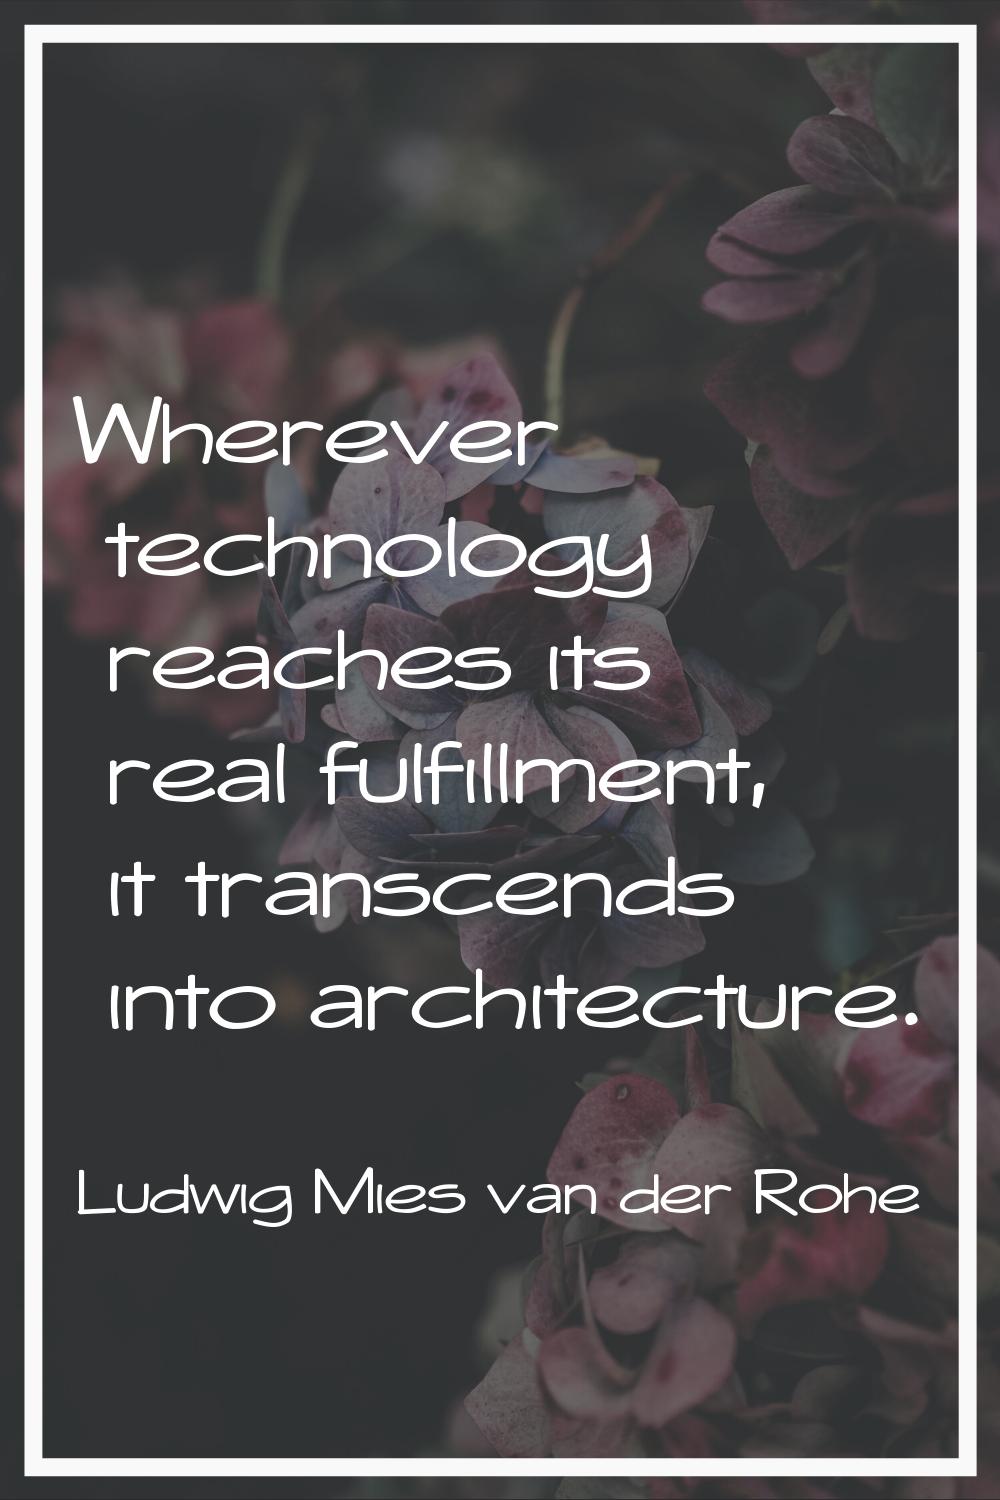 Wherever technology reaches its real fulfillment, it transcends into architecture.